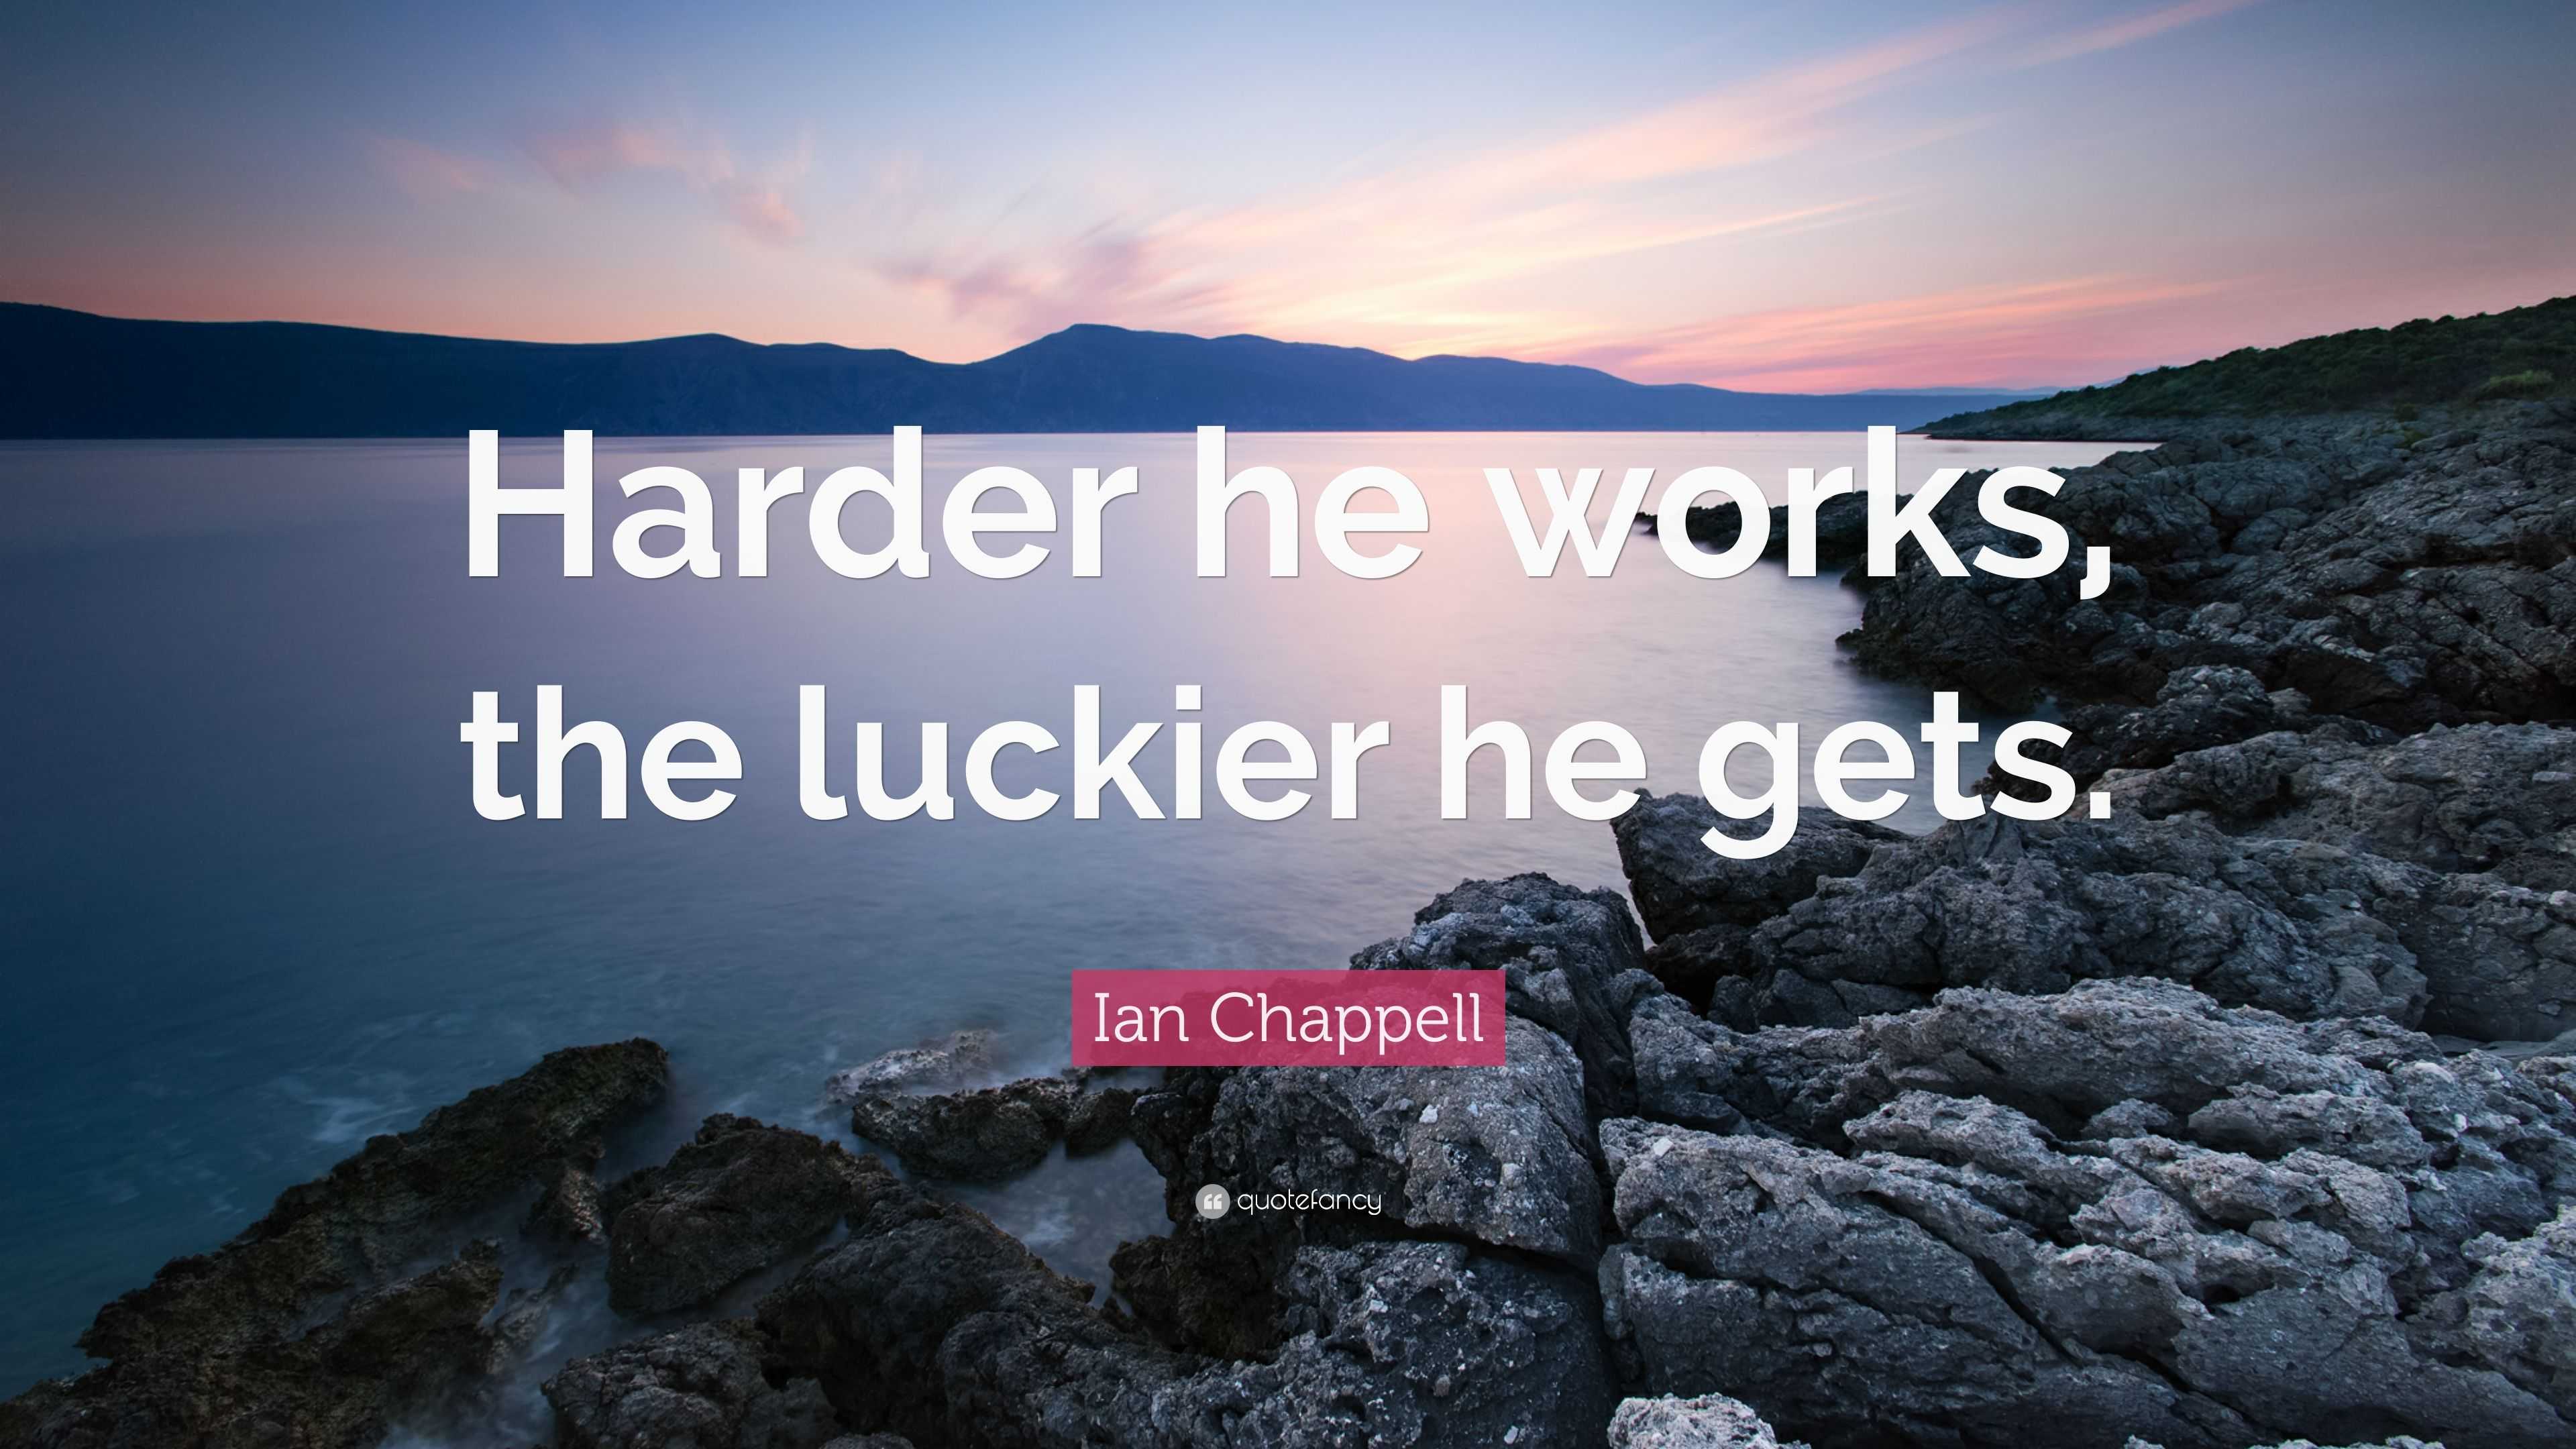 Ian Chappell Quote “harder He Works The Luckier He Gets”